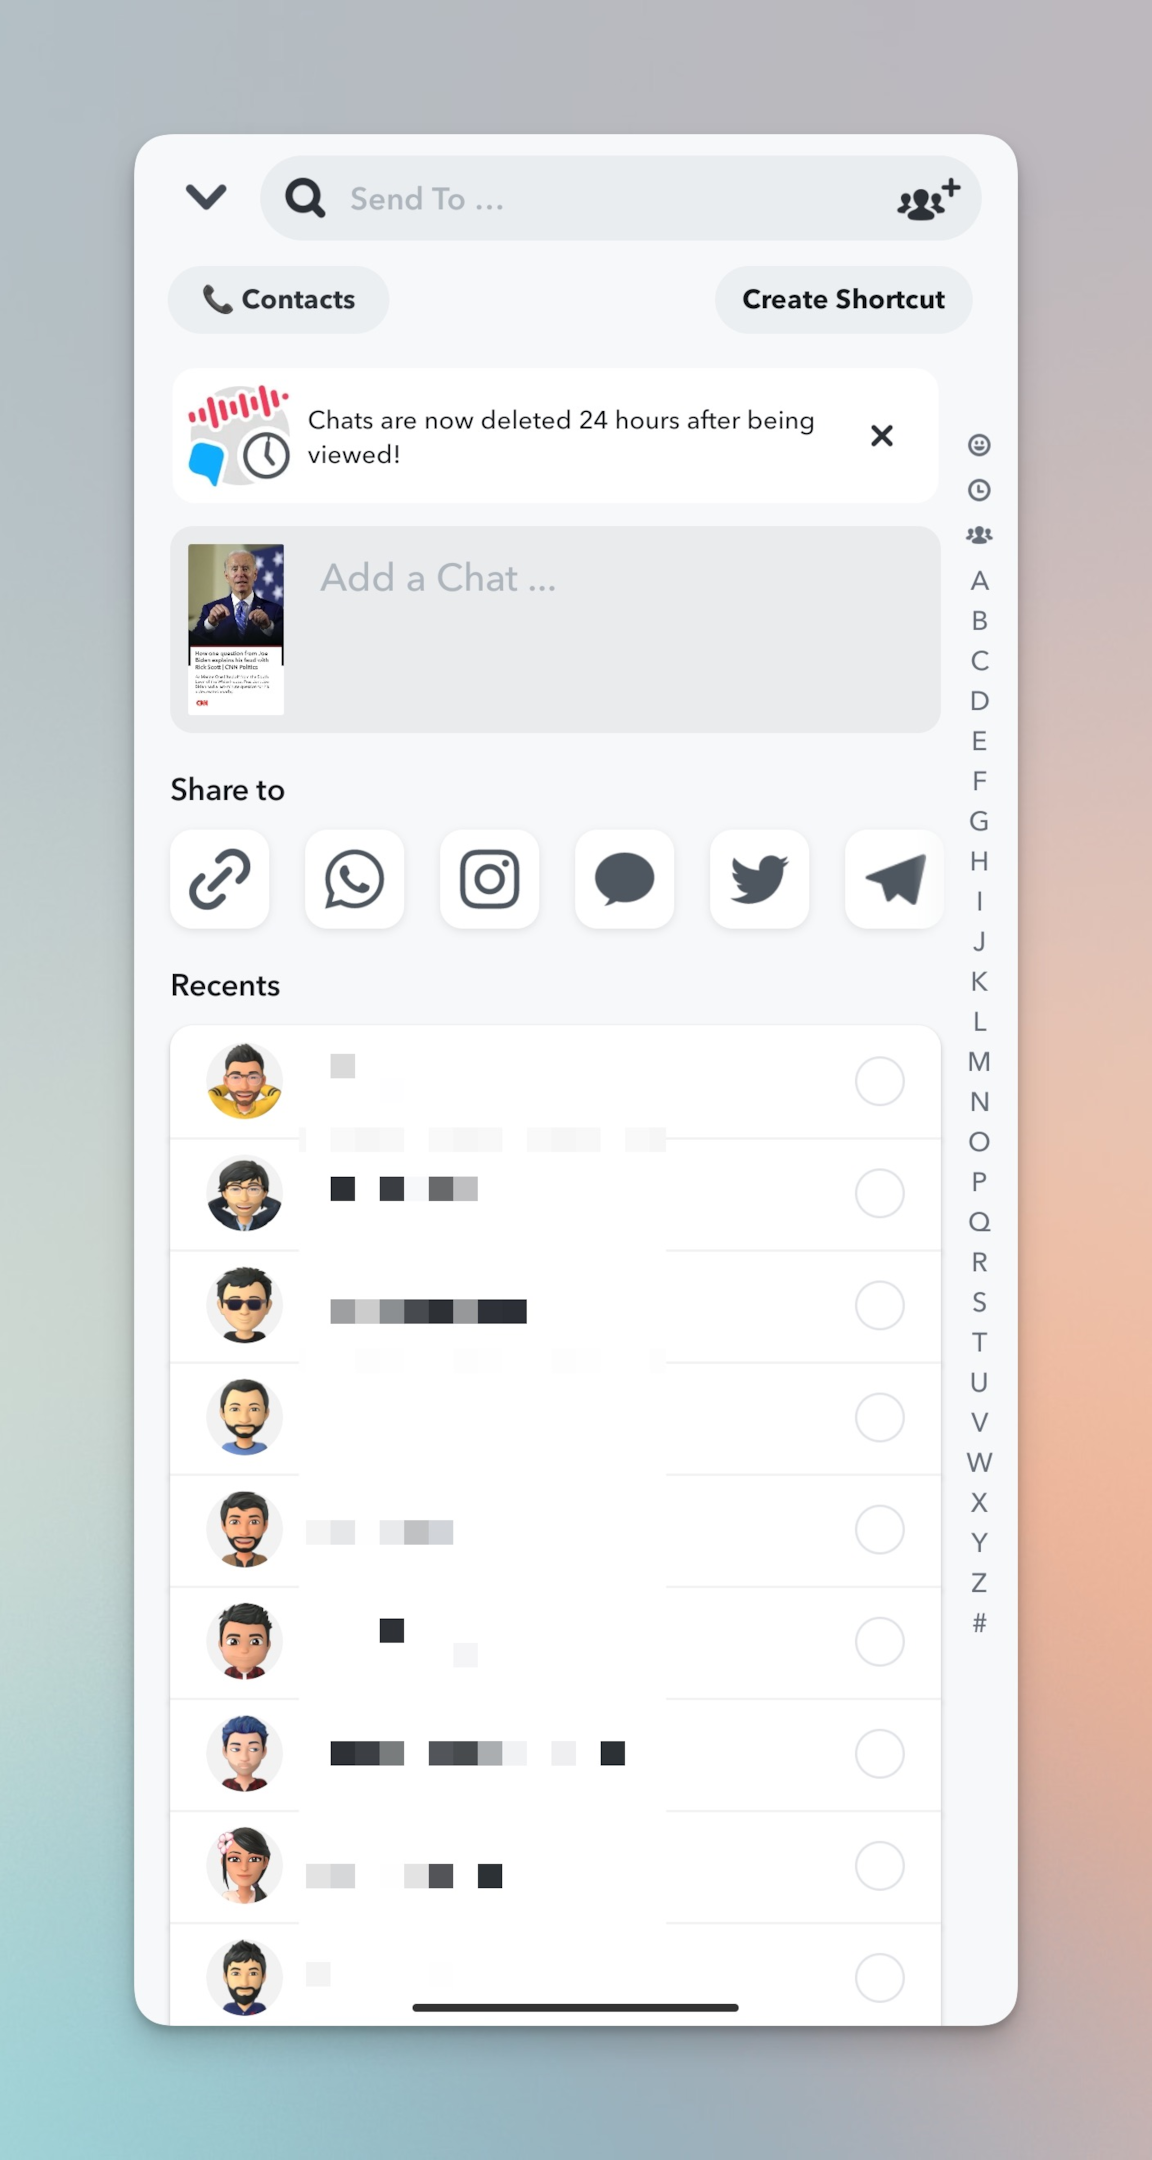 Remote.tools shows the share option along with friend list & family members to share the story with them